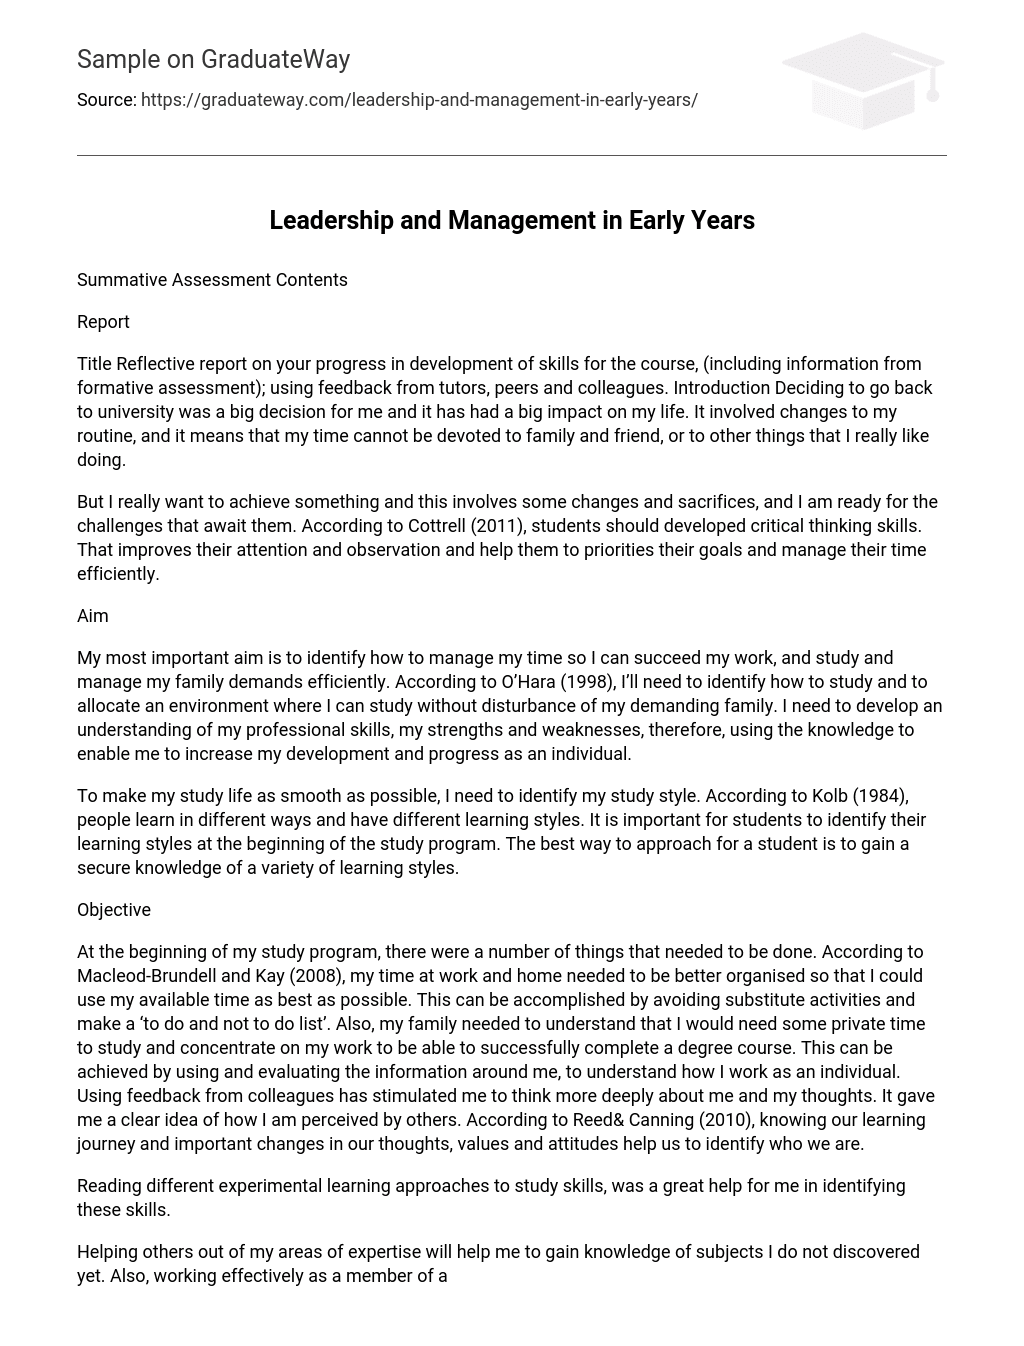 Leadership and Management in Early Years